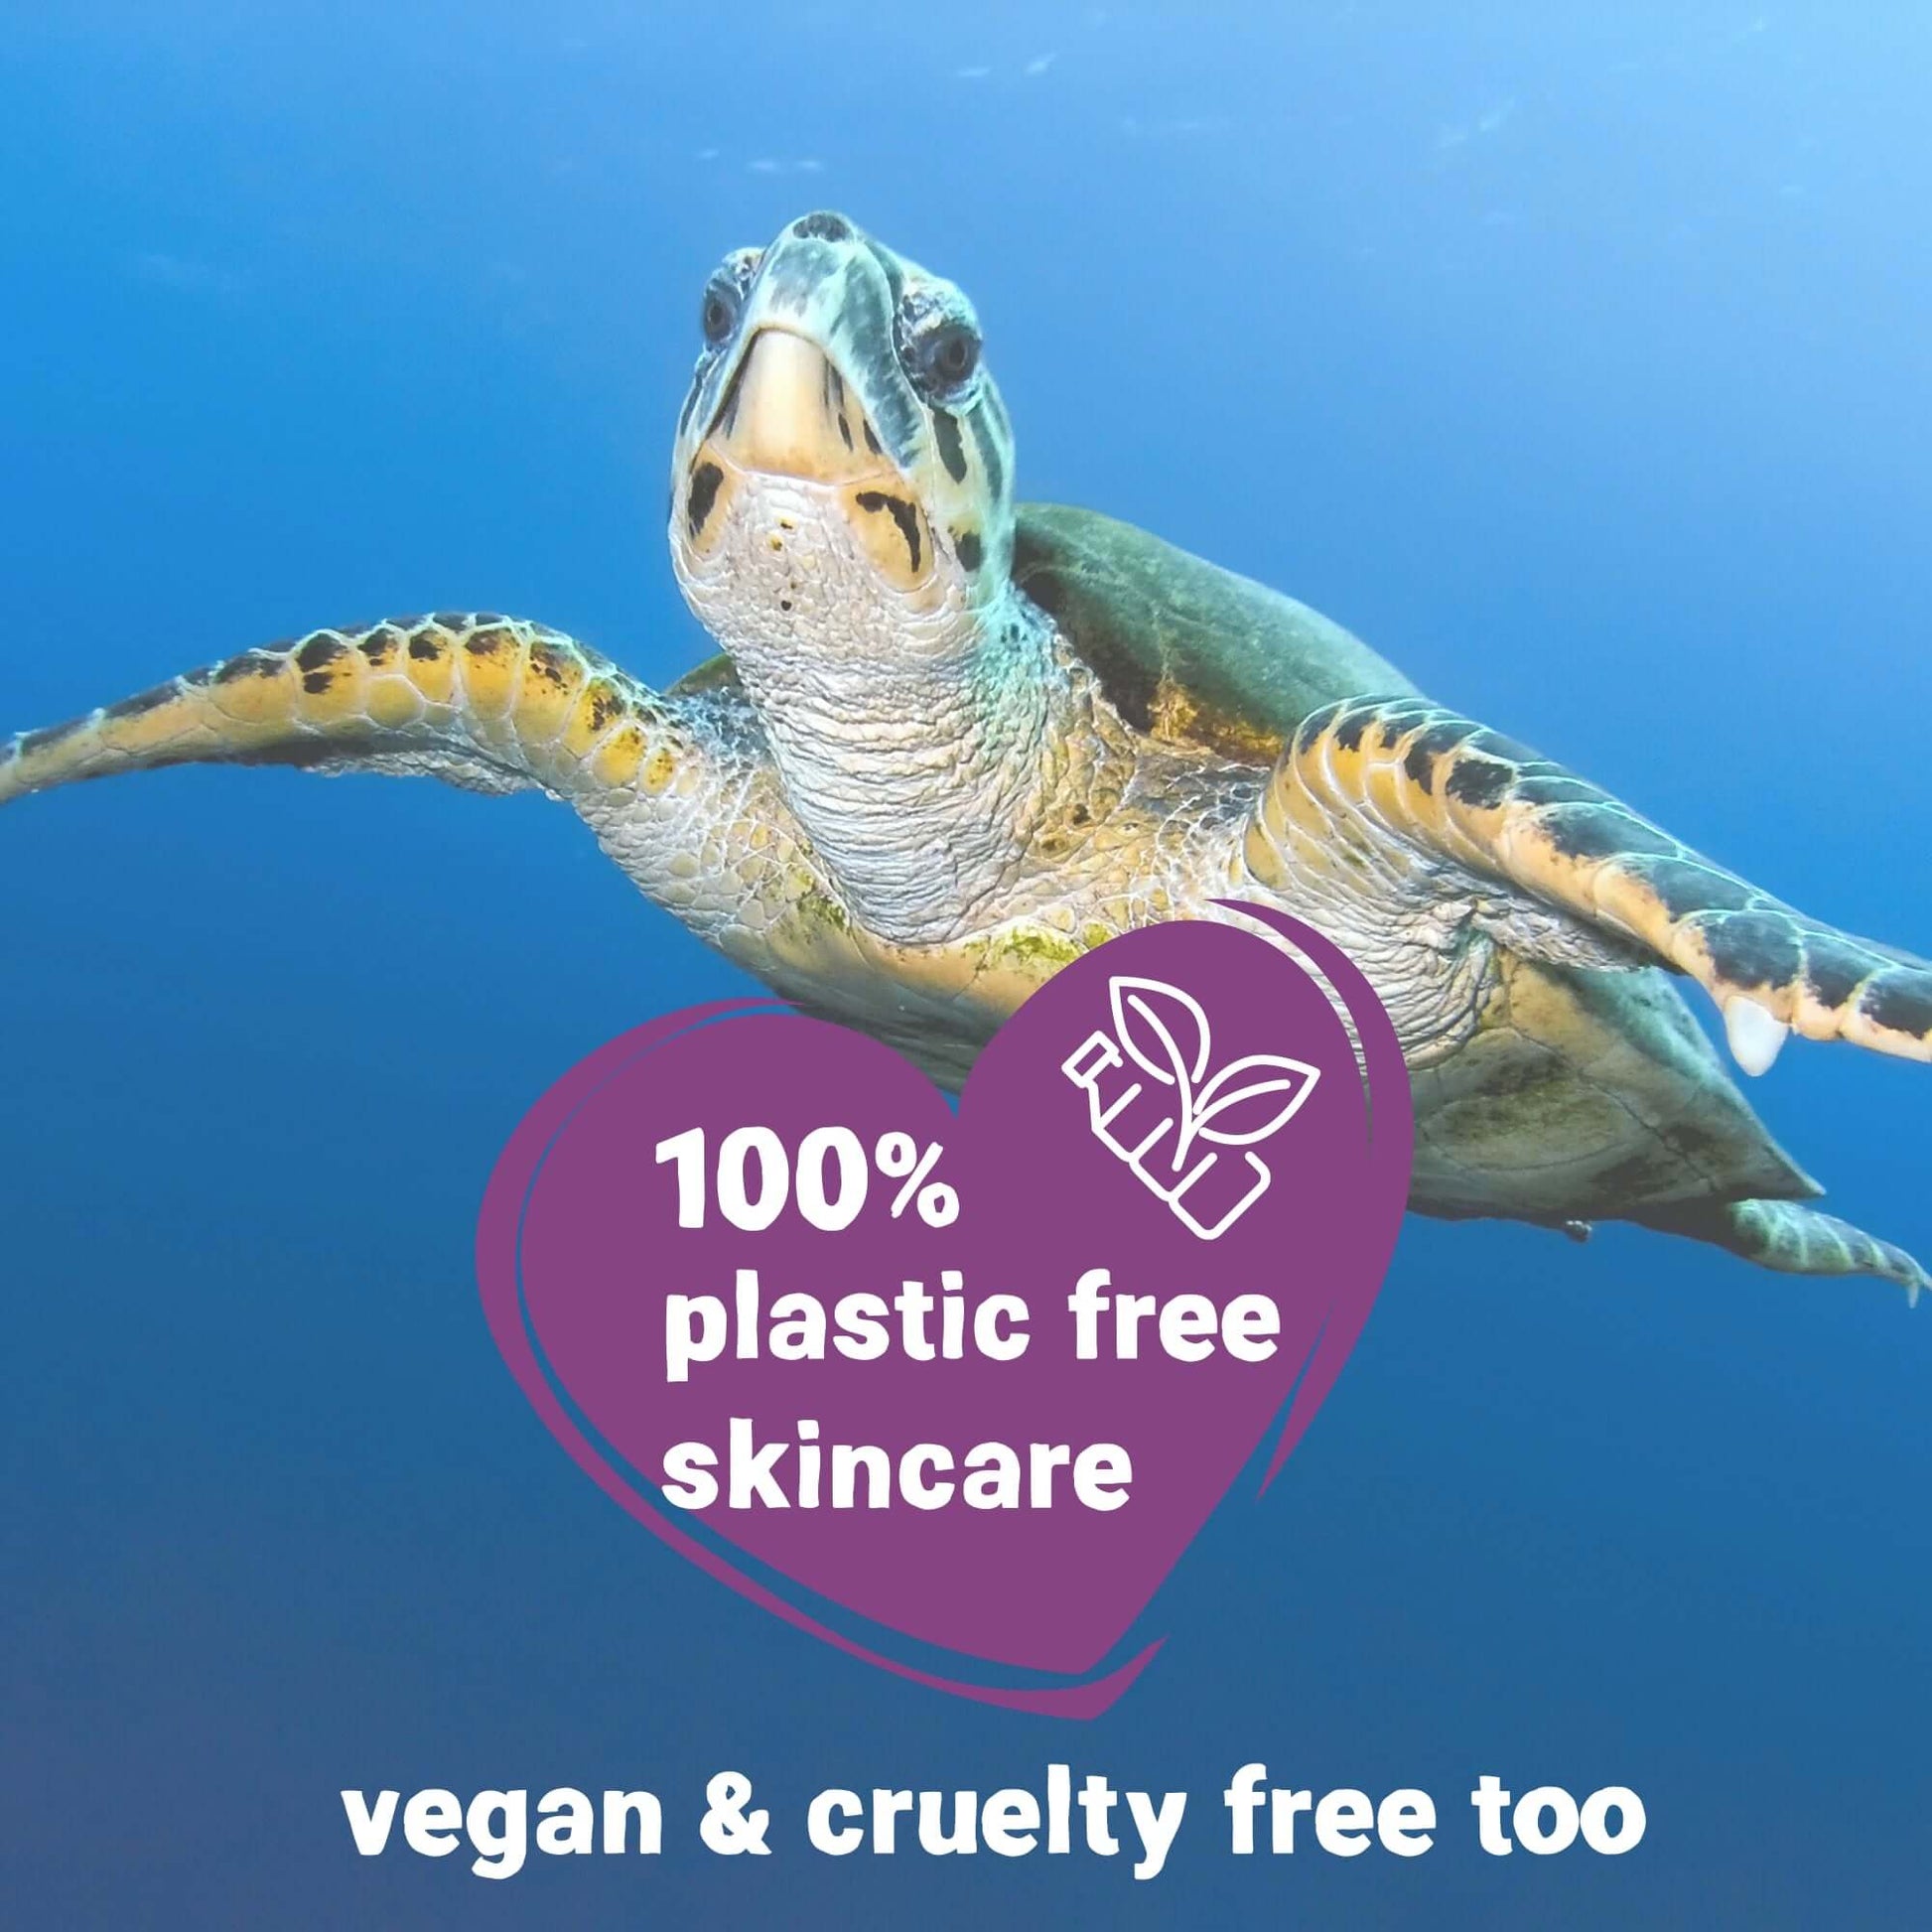 ocean and wildlife to show eco friendly gift making plastic free, vegan skincare